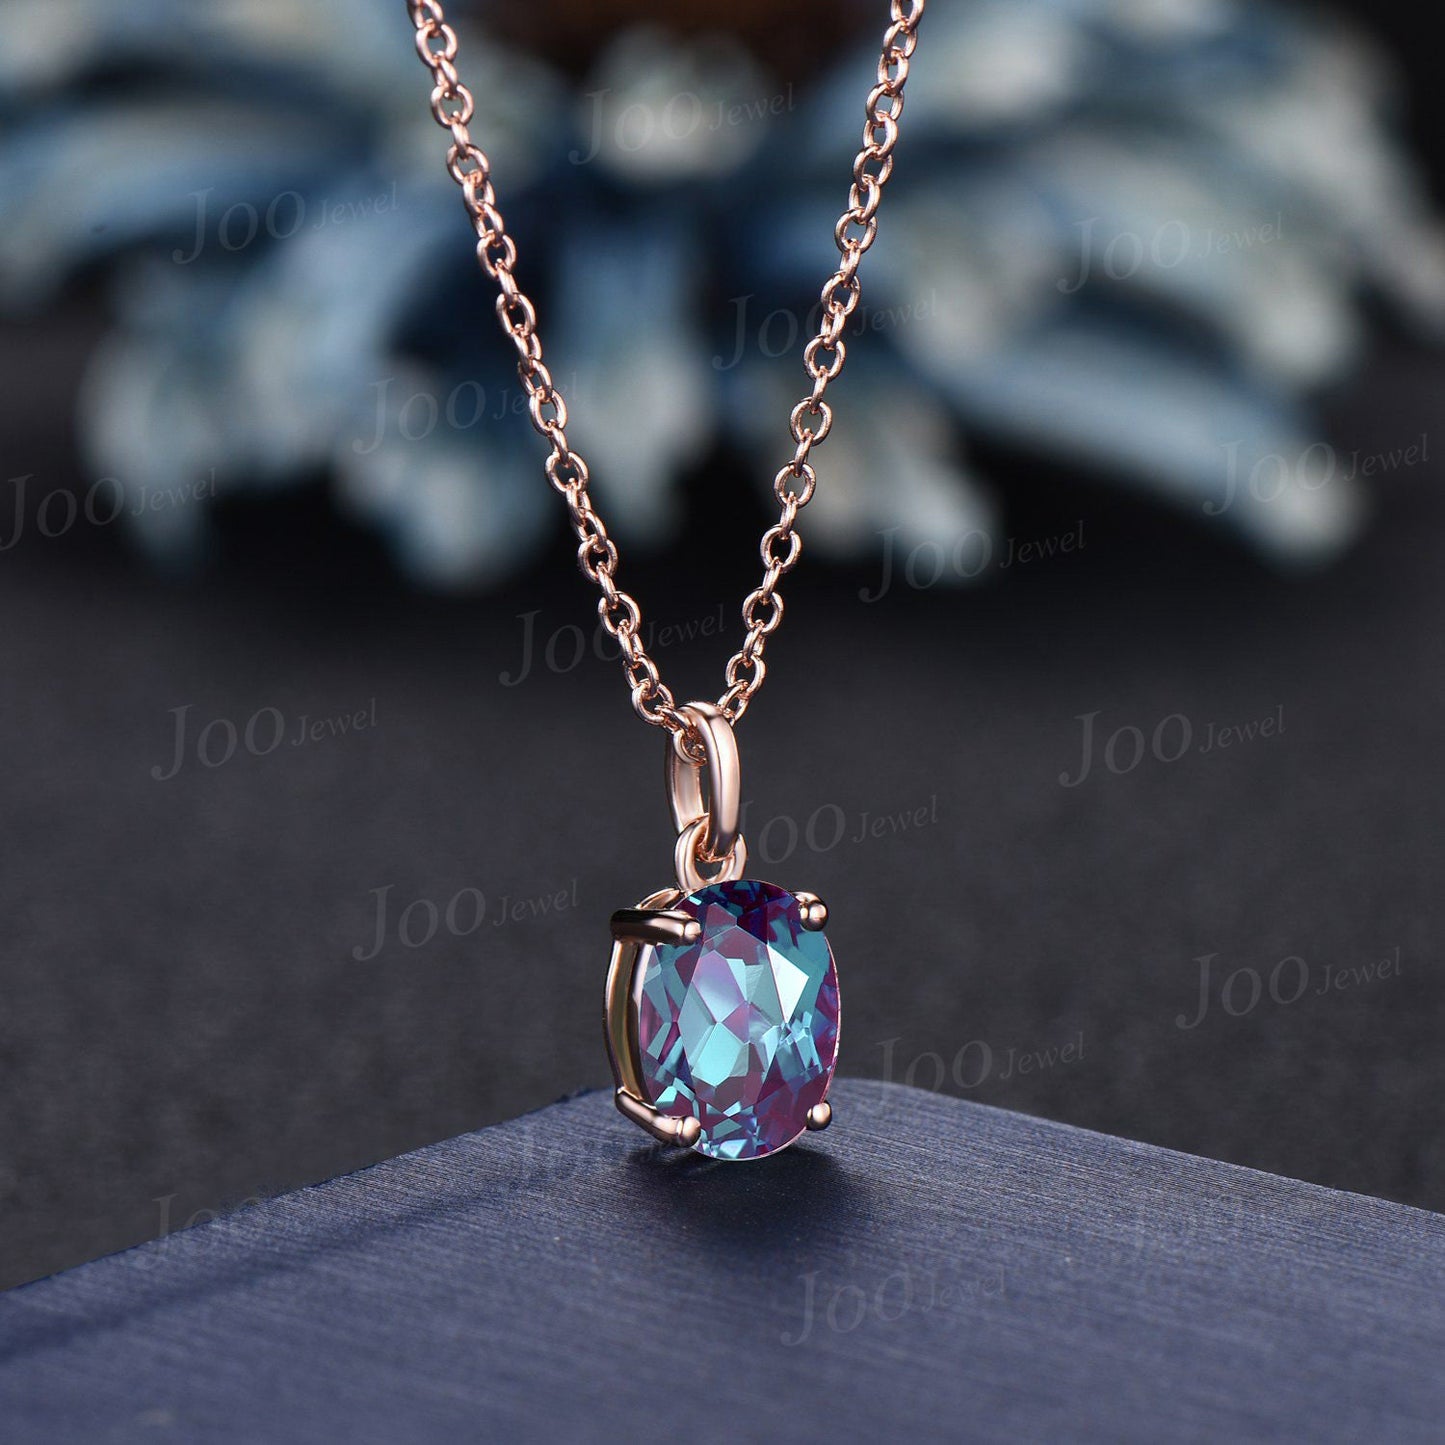 Oval Cut Color-Change Alexandrite Necklace Silver/Solid 14k/18k Rose Gold Vintage Personalized Wedding Pendant Women Anniversary Bridal Gift